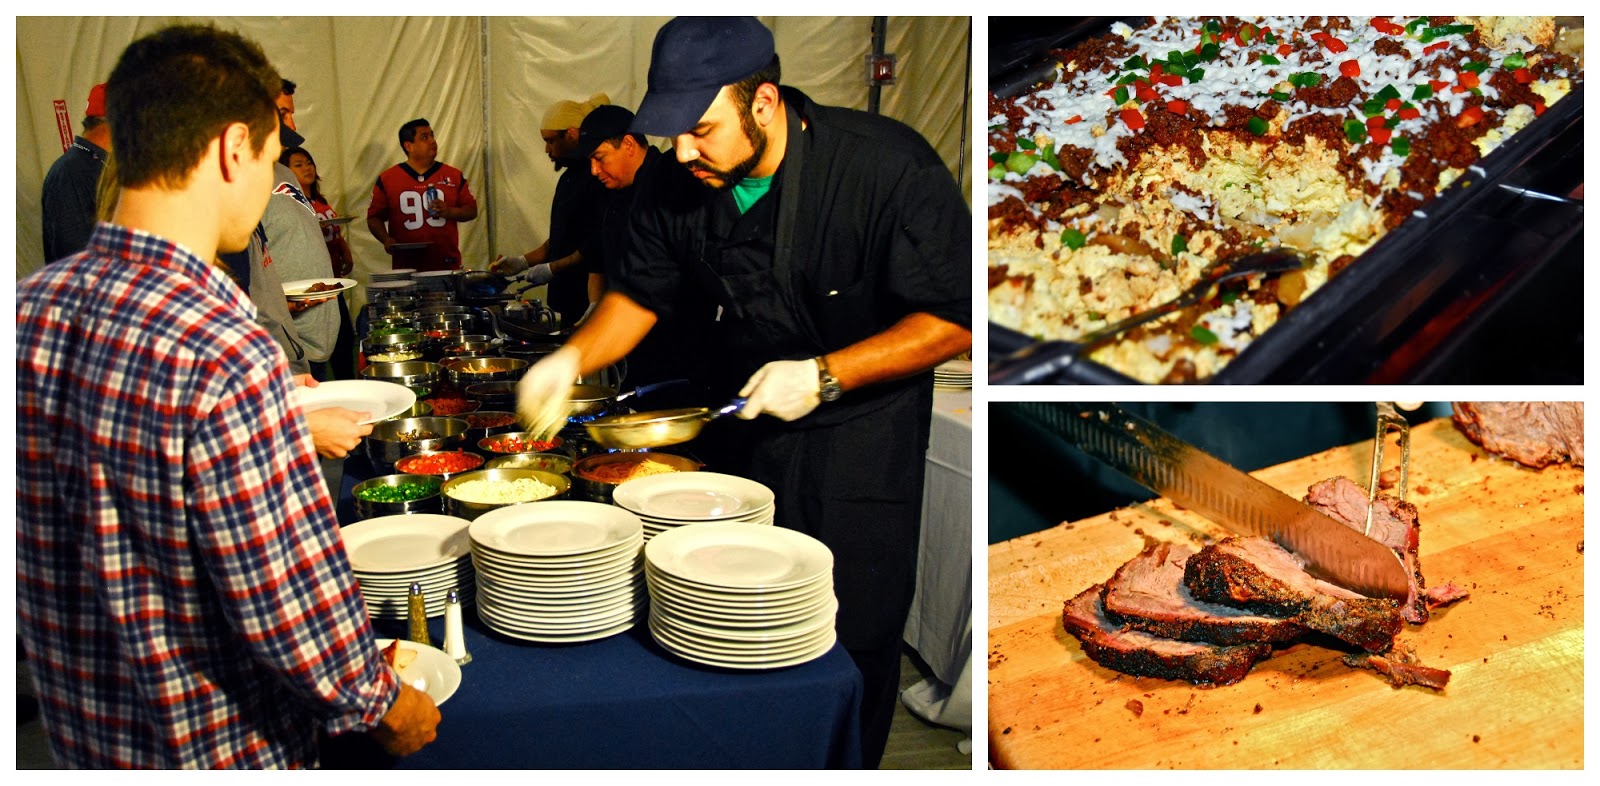 The Weekend Gourmet: Football Food FocusFeaturing Houston Texans  Tailgating!